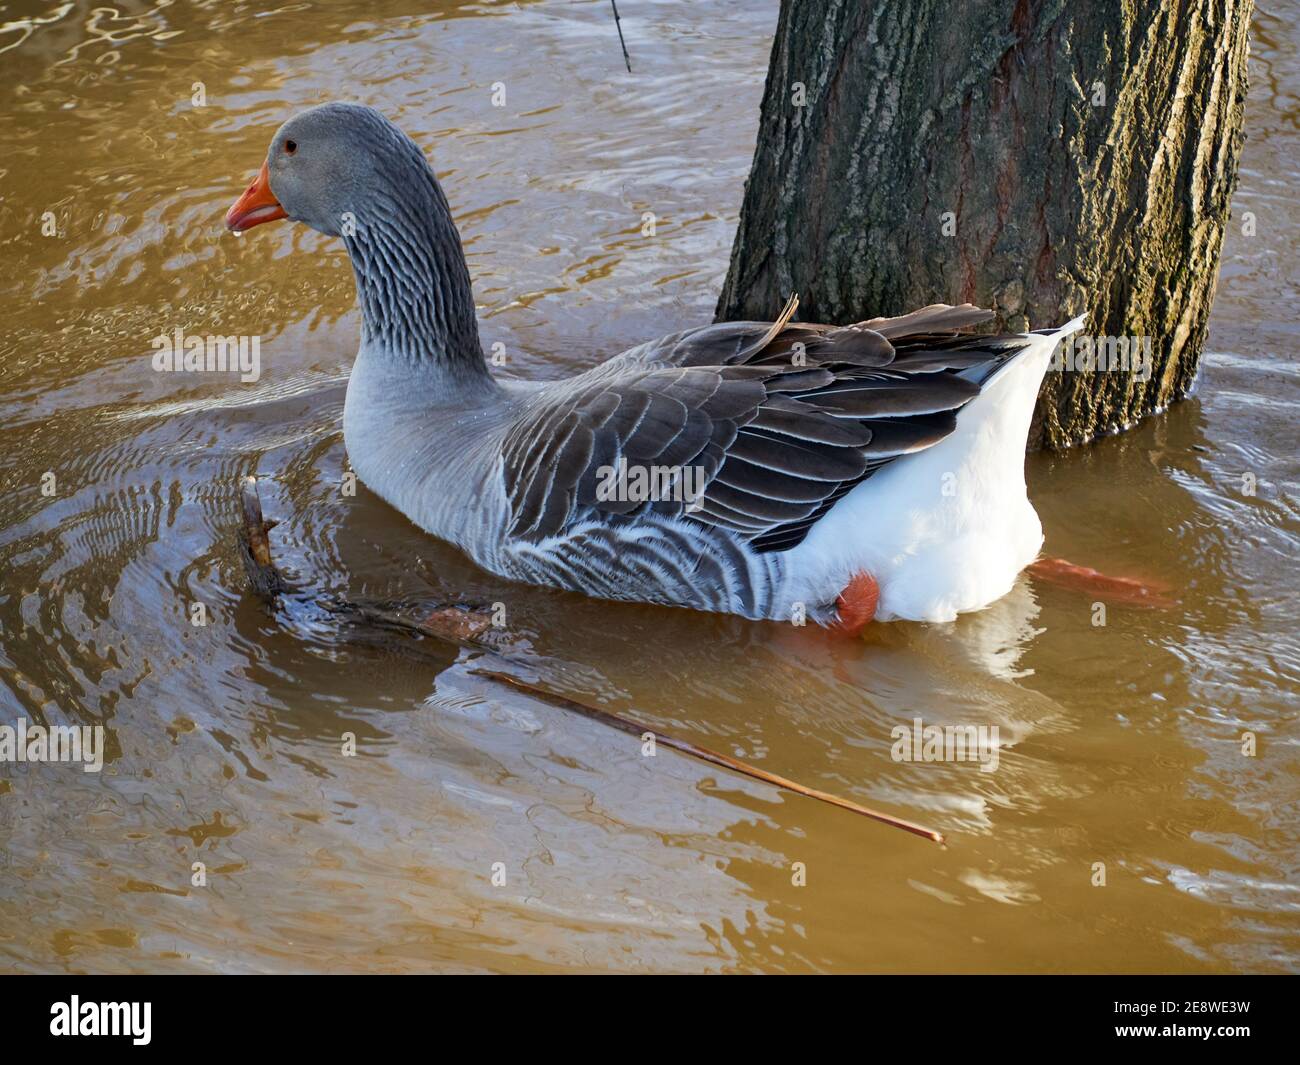 Close-up view of a goose swimming in the river at sunset. Stock Photo